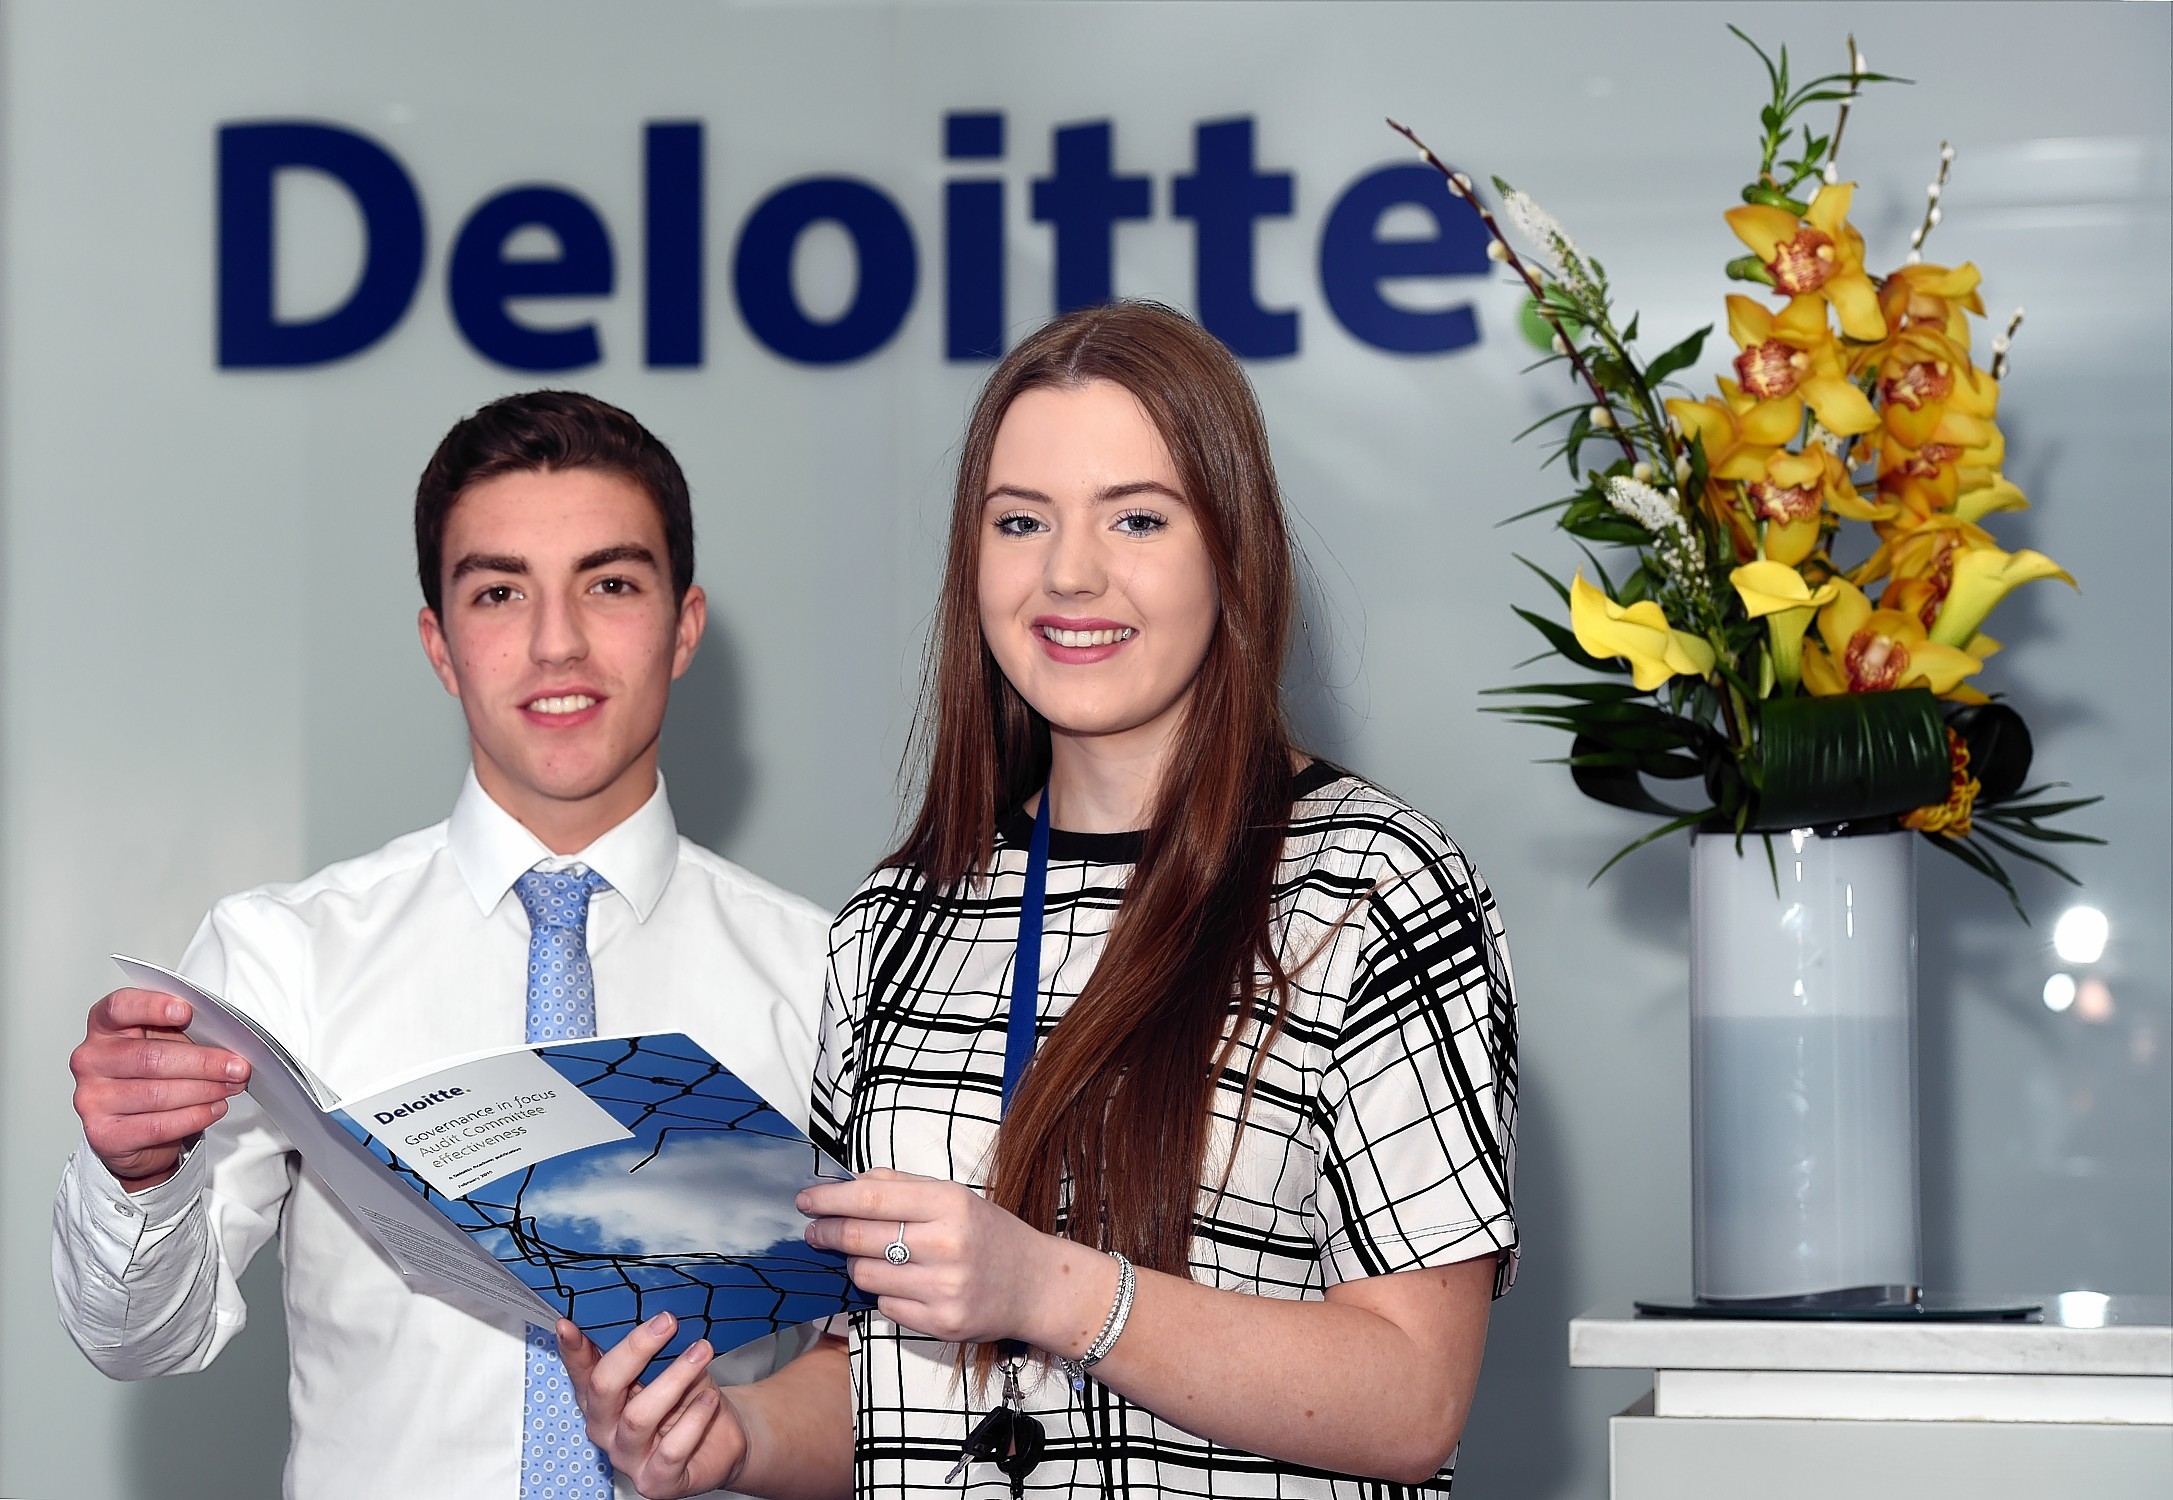 Deloitte trainee chartered accountants Aaron McDonald and Aimee Ritchie at their offices at Union Plaza.